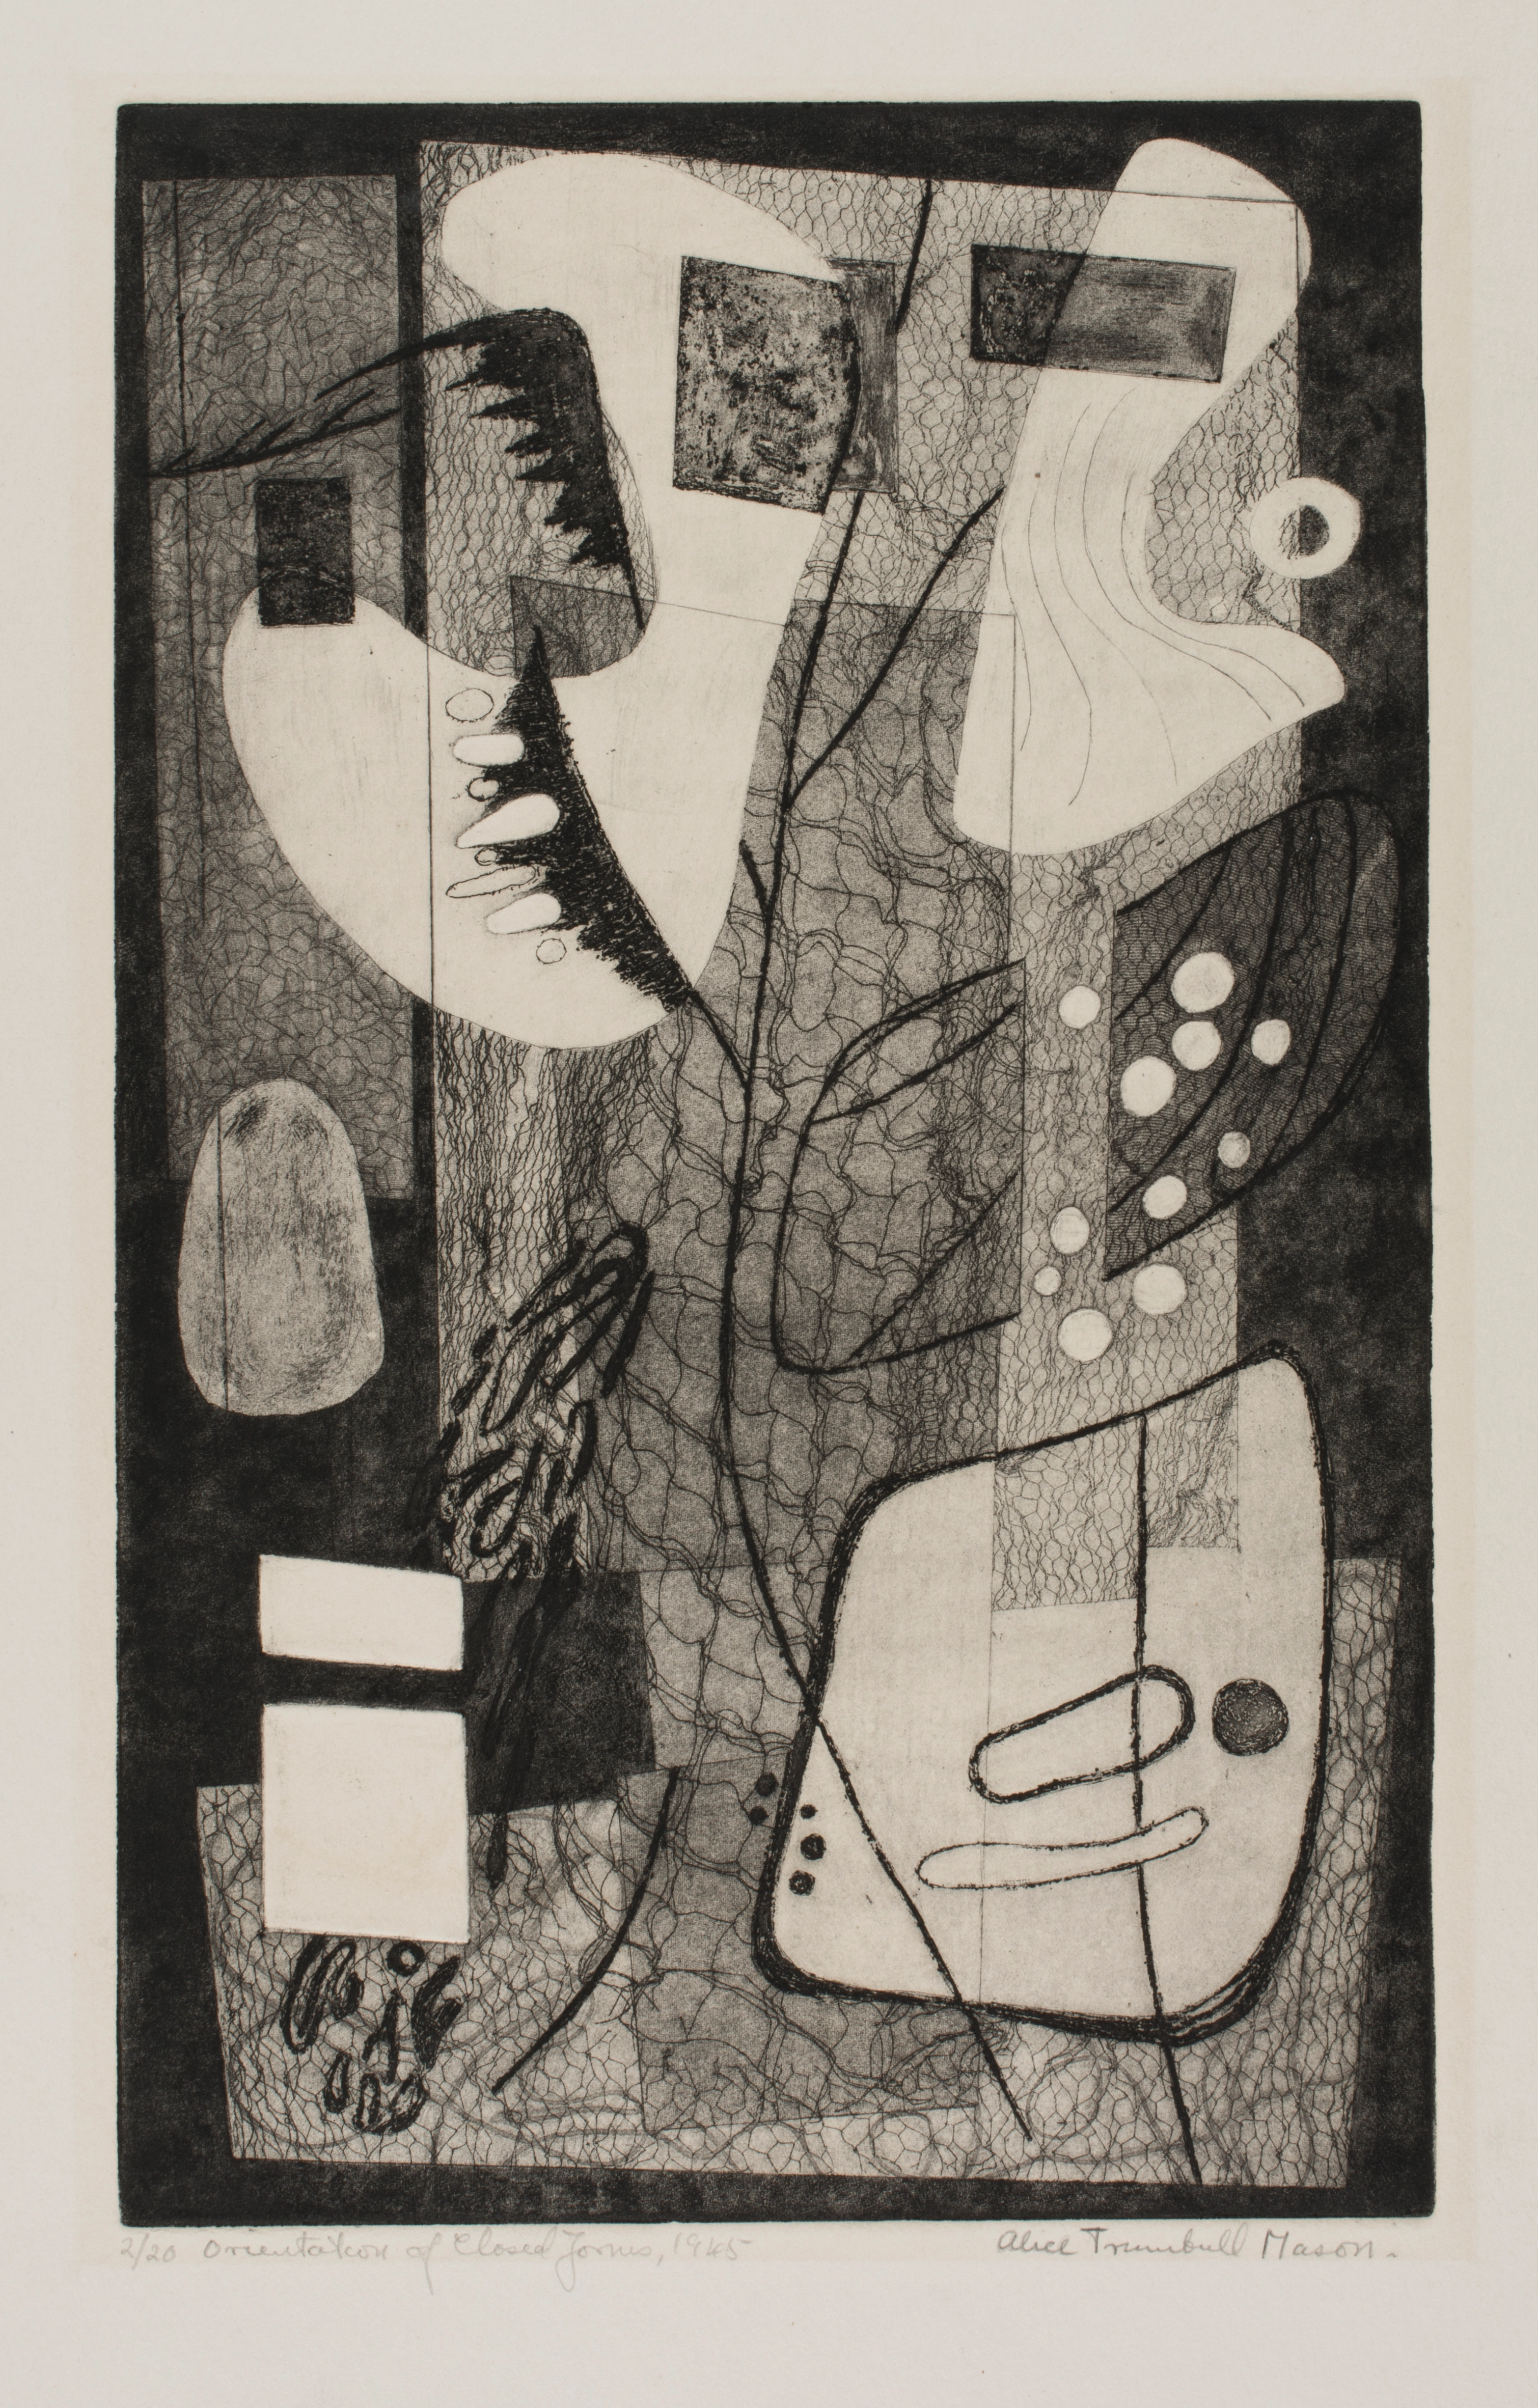 Abstract print on paper comprised of grey, white, and black organic forms and curves lines. Some of the forms contain a net-like texture inside created by lines.